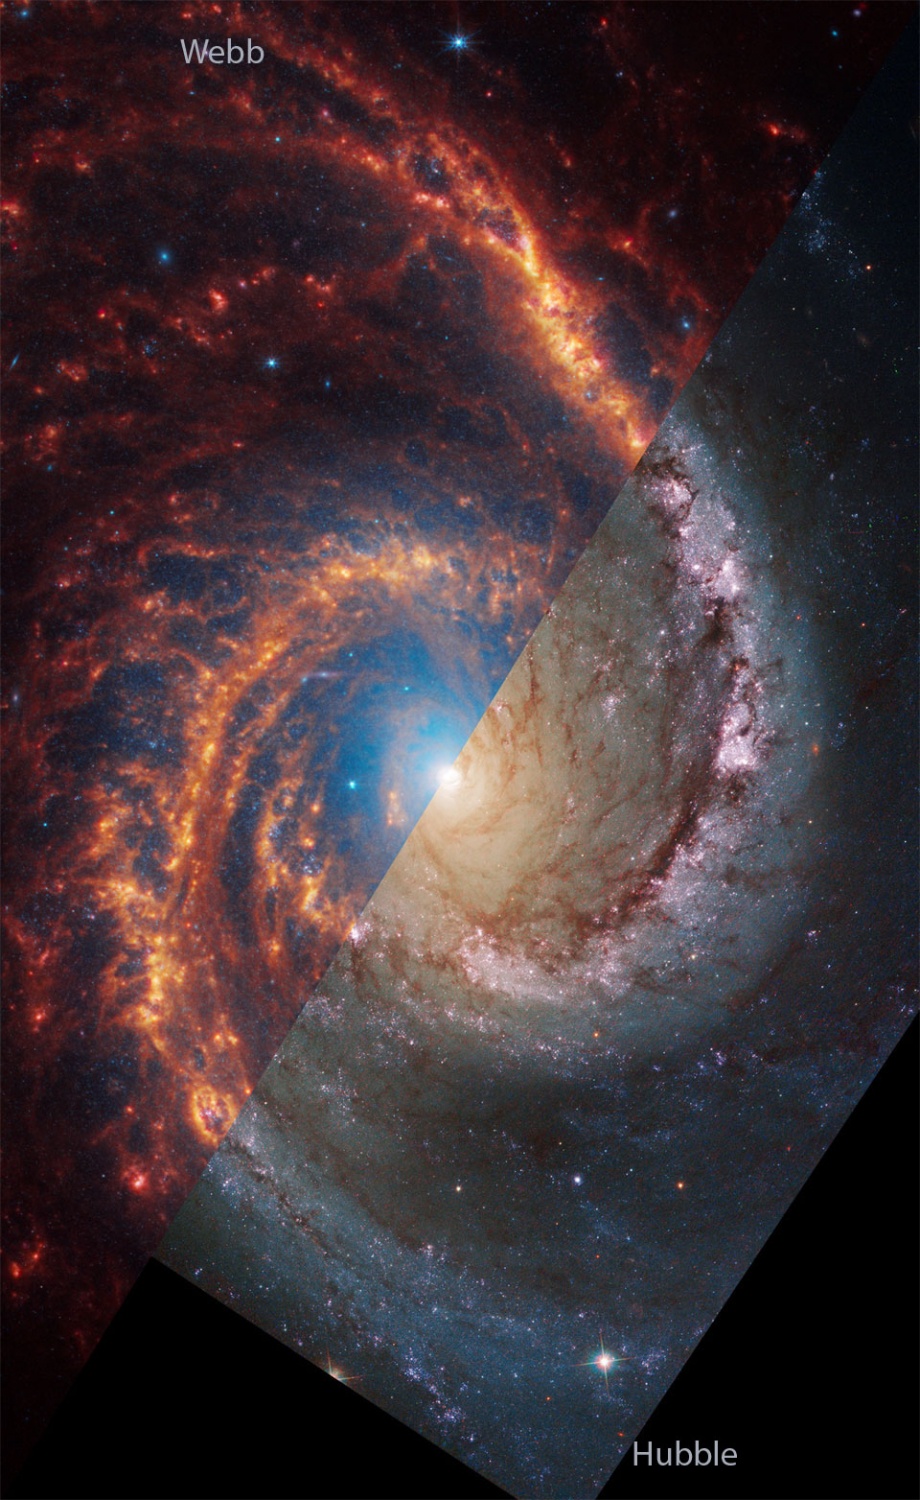 NASA's Picture of the Day Unveils What a Spiral Galaxy Looks Like in the Eyes of Webb and Hubble